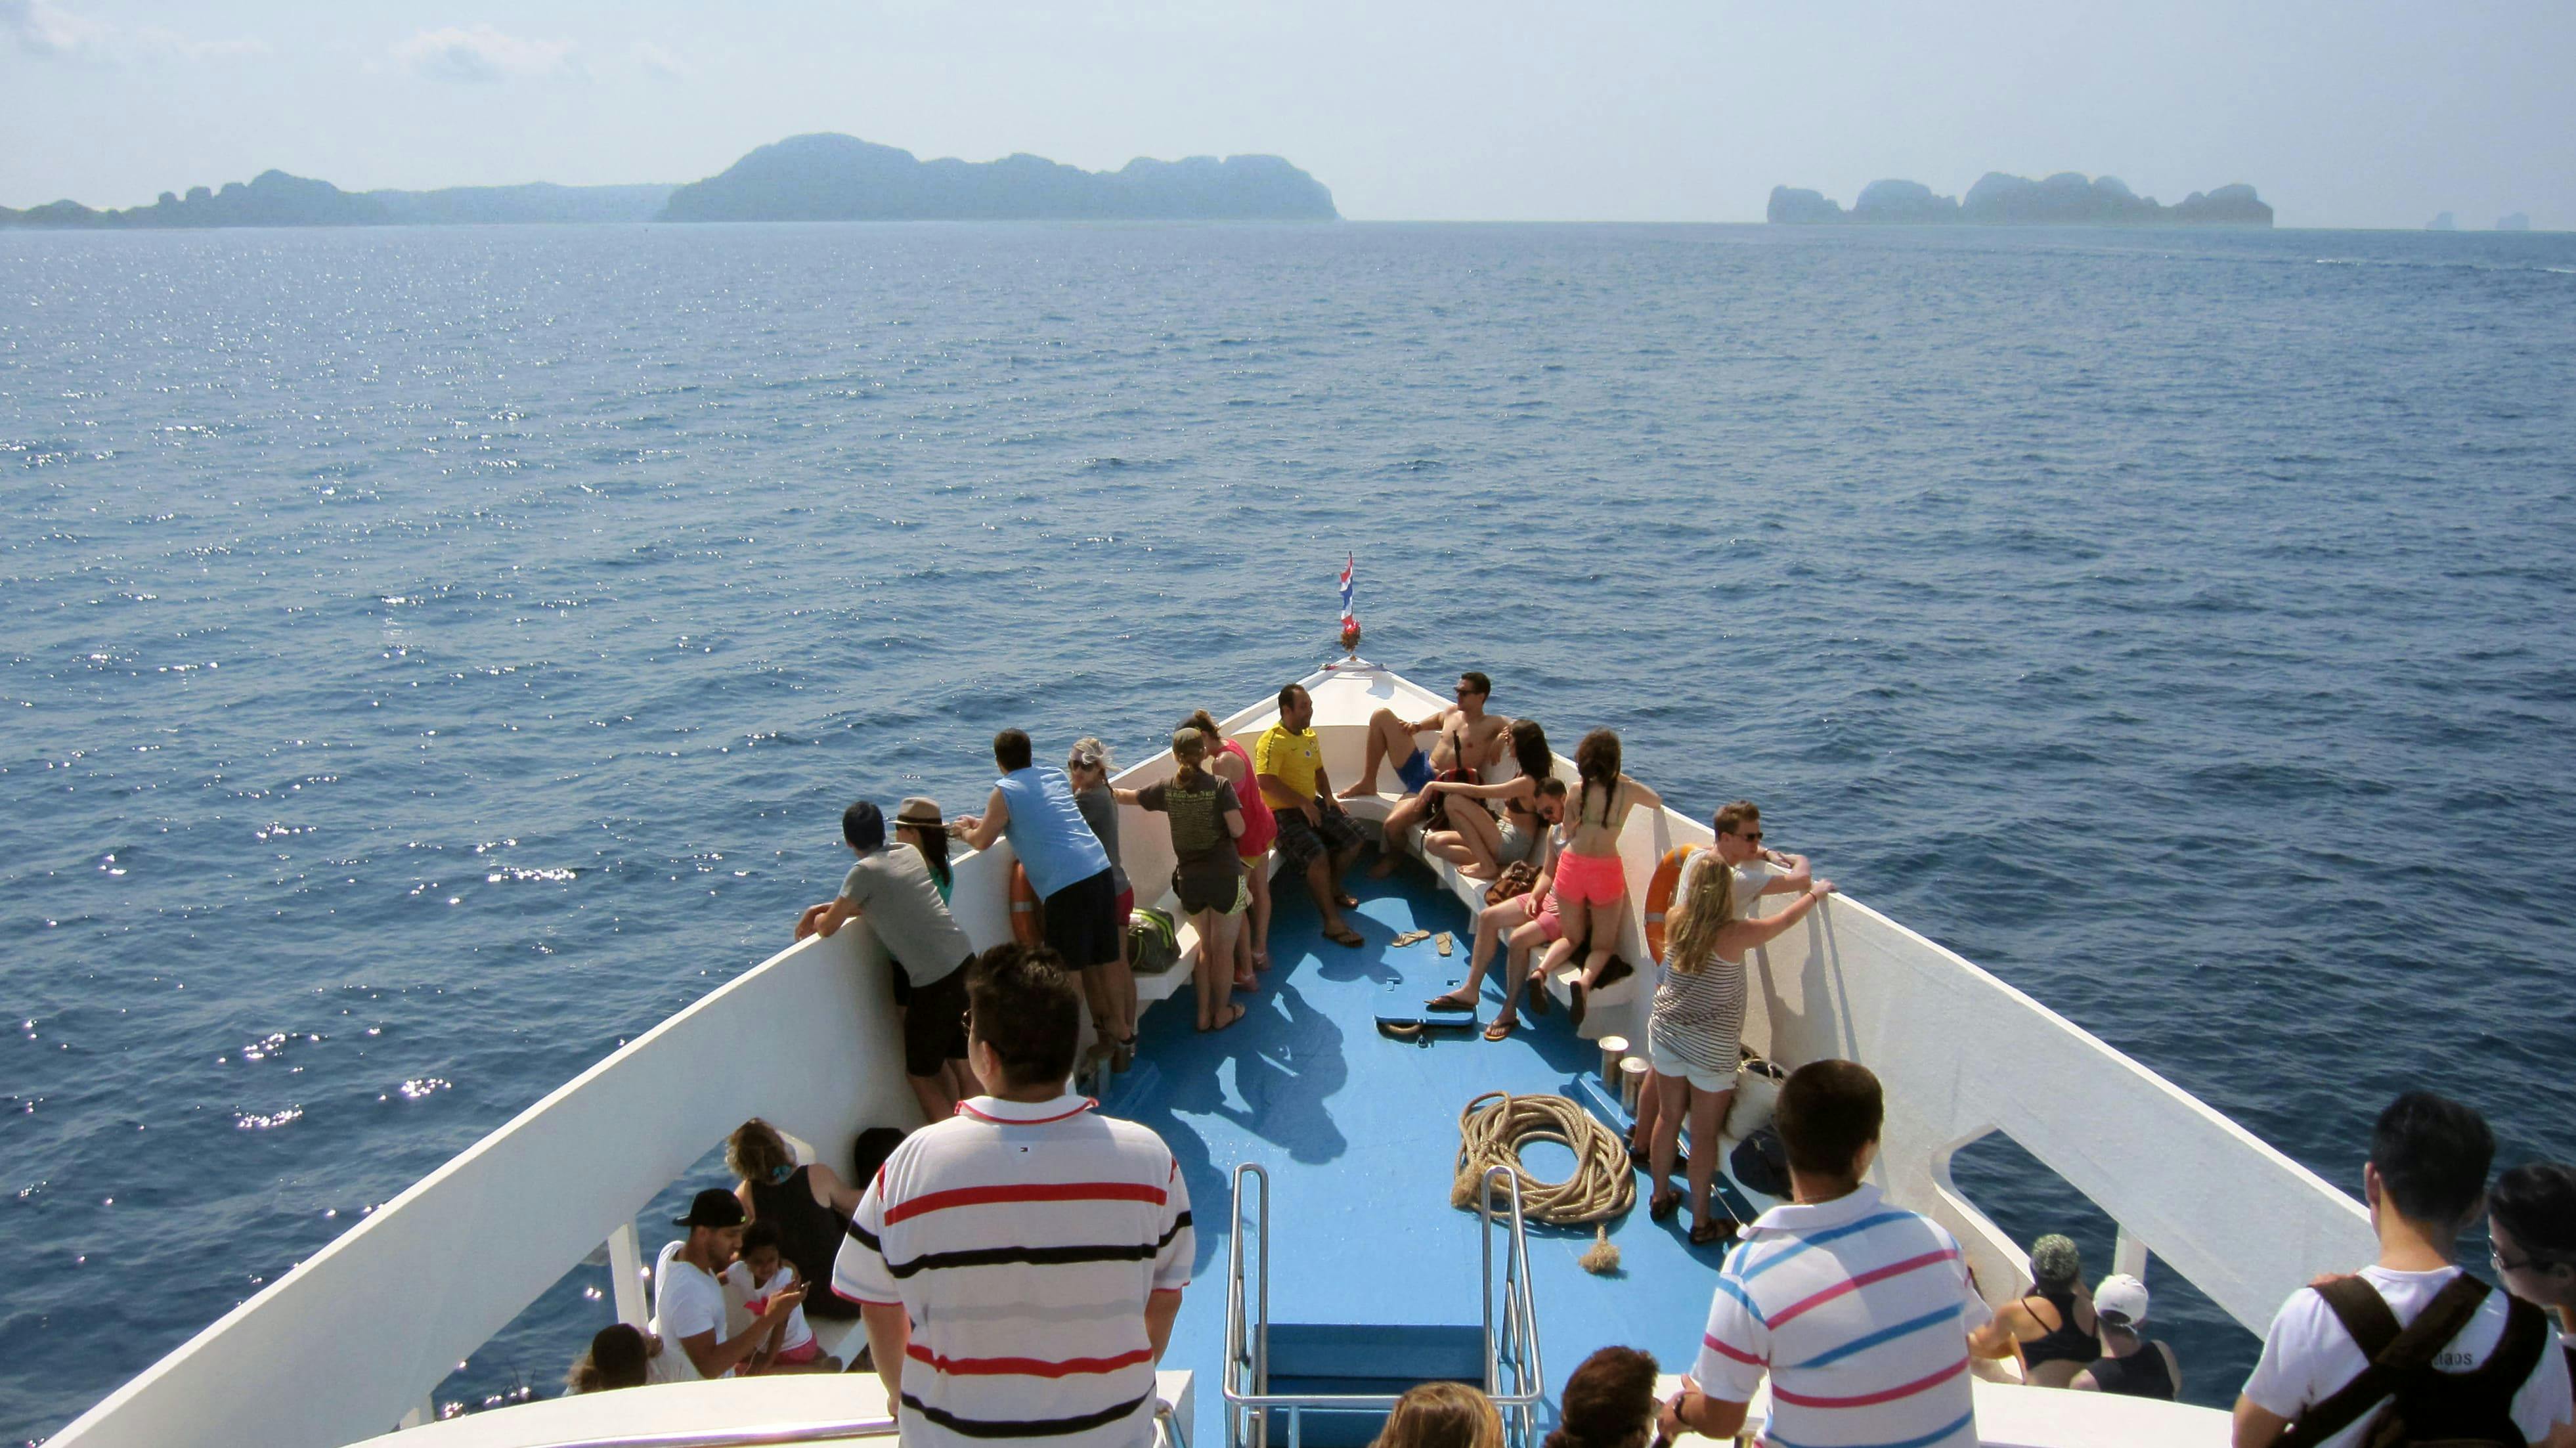 One-way Standard Class Ferry Ticket from Phuket to Phi Phi Don